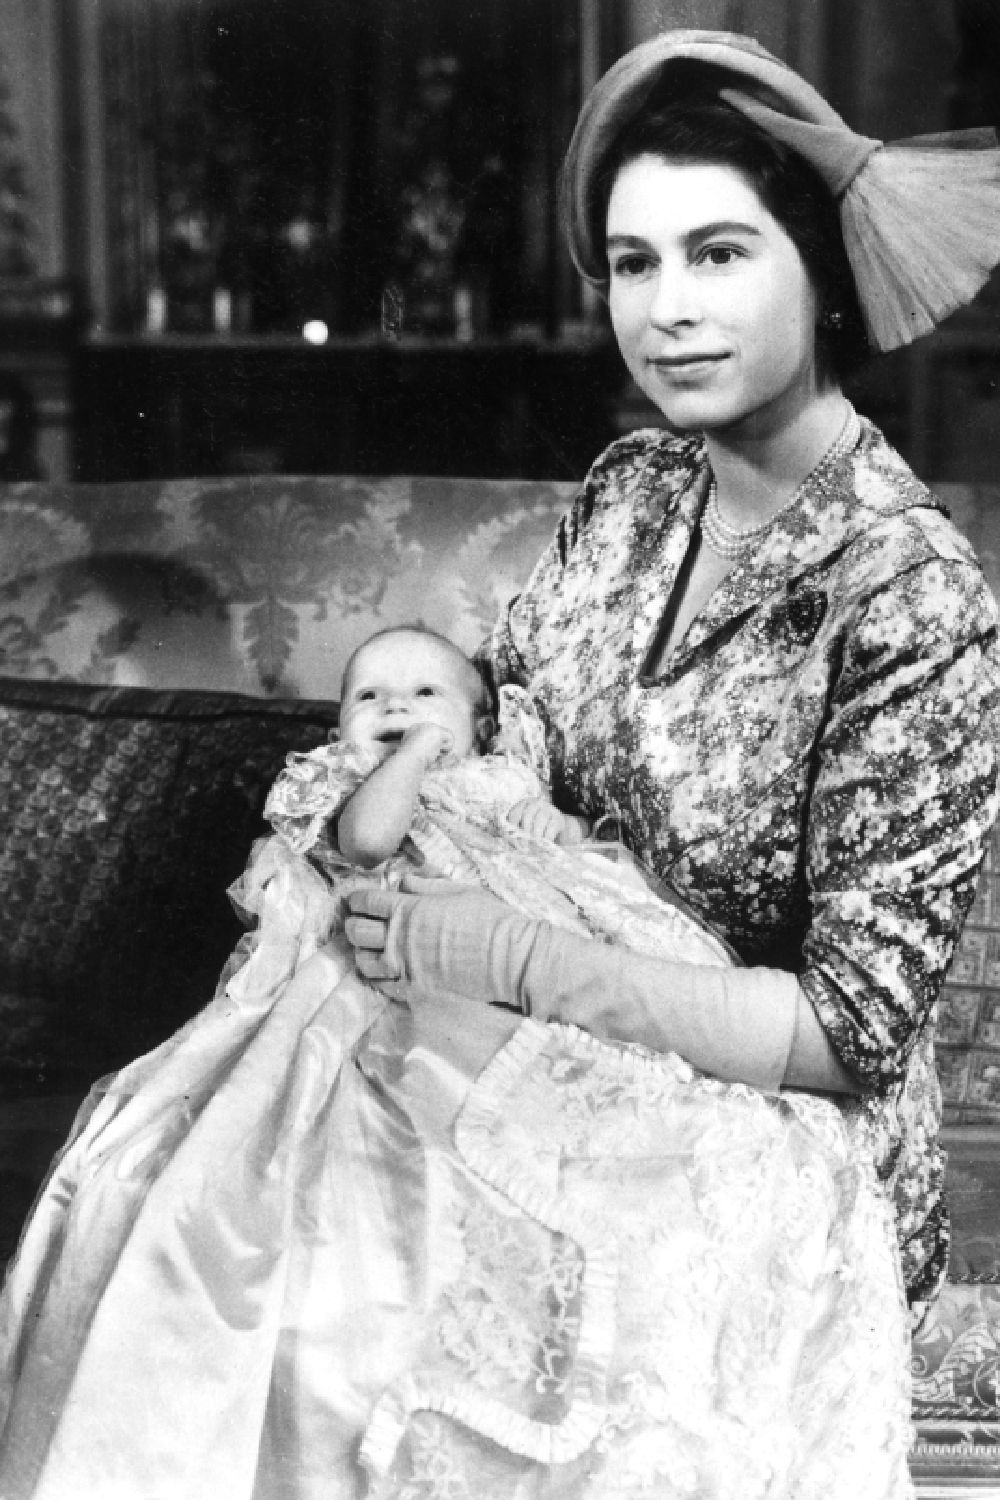 <p>                     Princess Anne didn't actually attend the ceremony as she was considered too young (she was two years old at the time). However, the young Princess did later join the royal family on the Buckingham Palace balcony.                   </p>